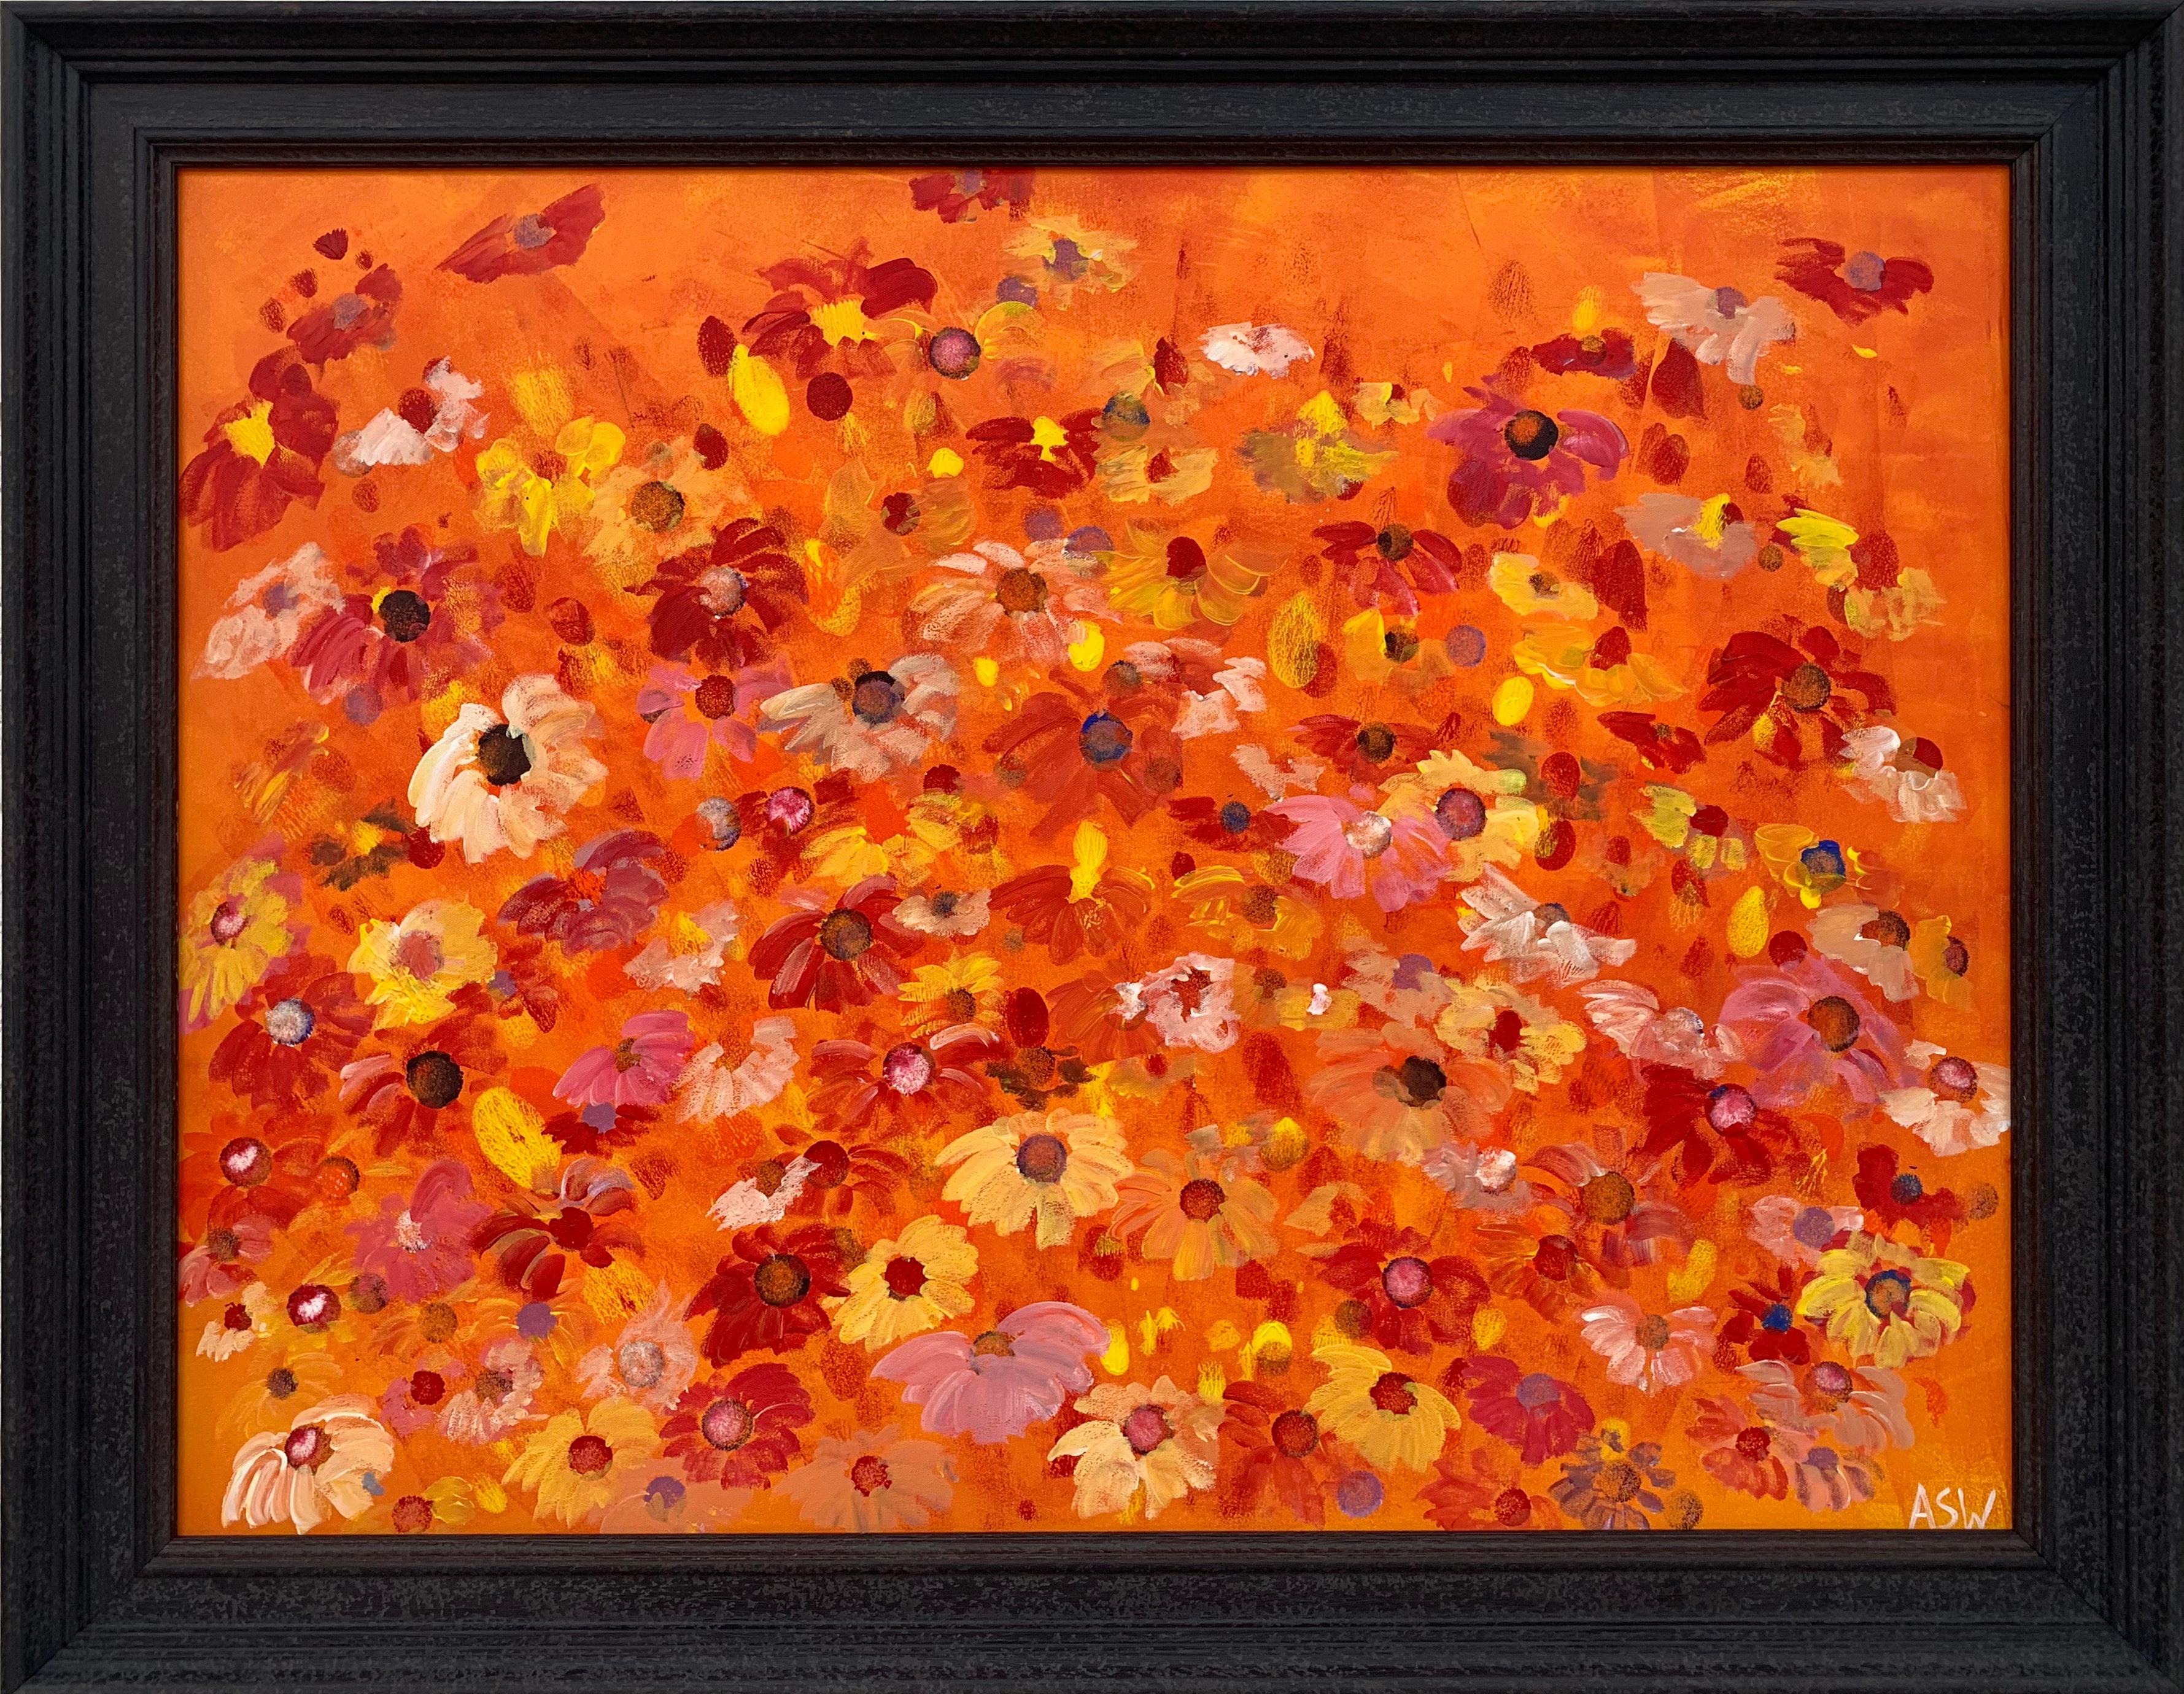 Abstract Red Pink Wild Flowers on Orange Design by British Contemporary Artist